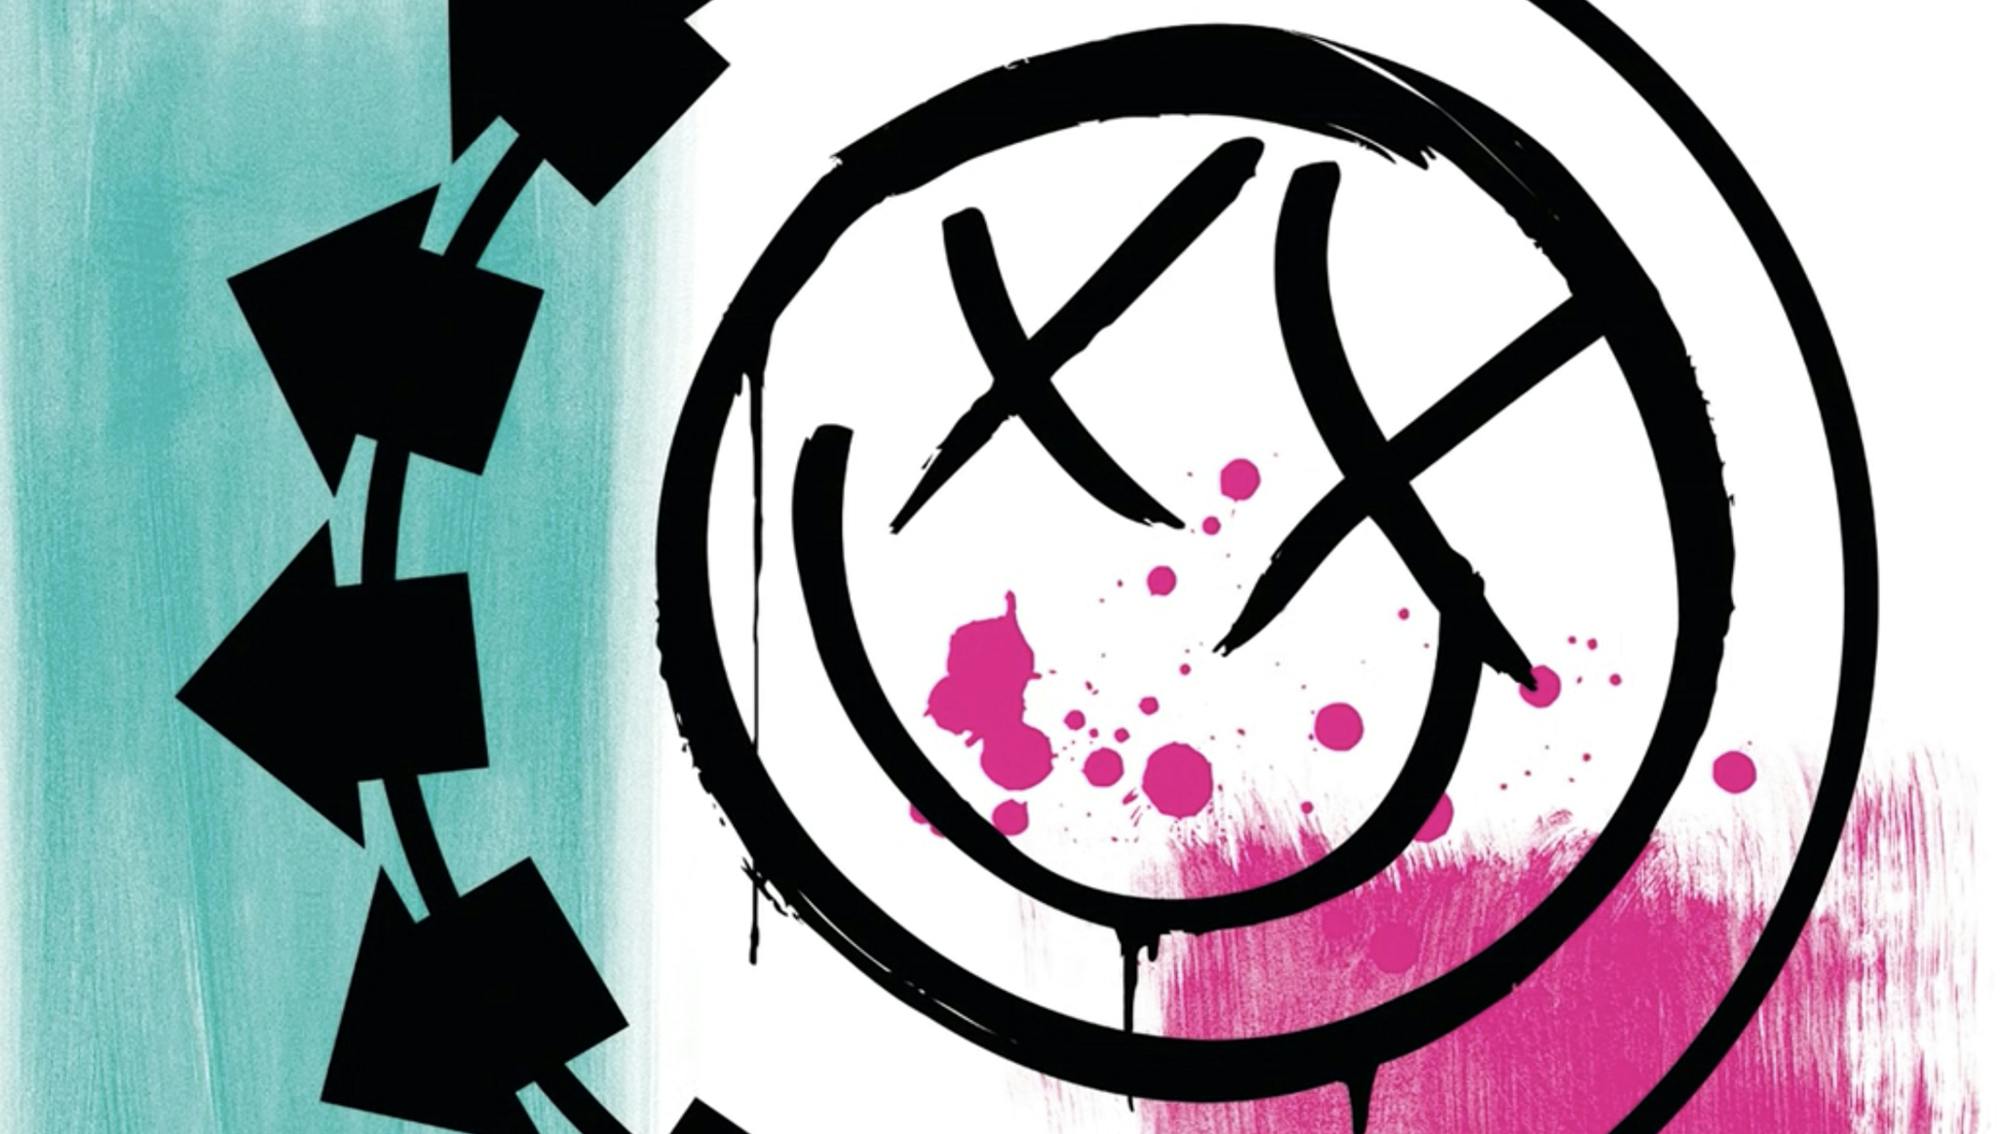 14 things blink-182’s Untitled album taught us